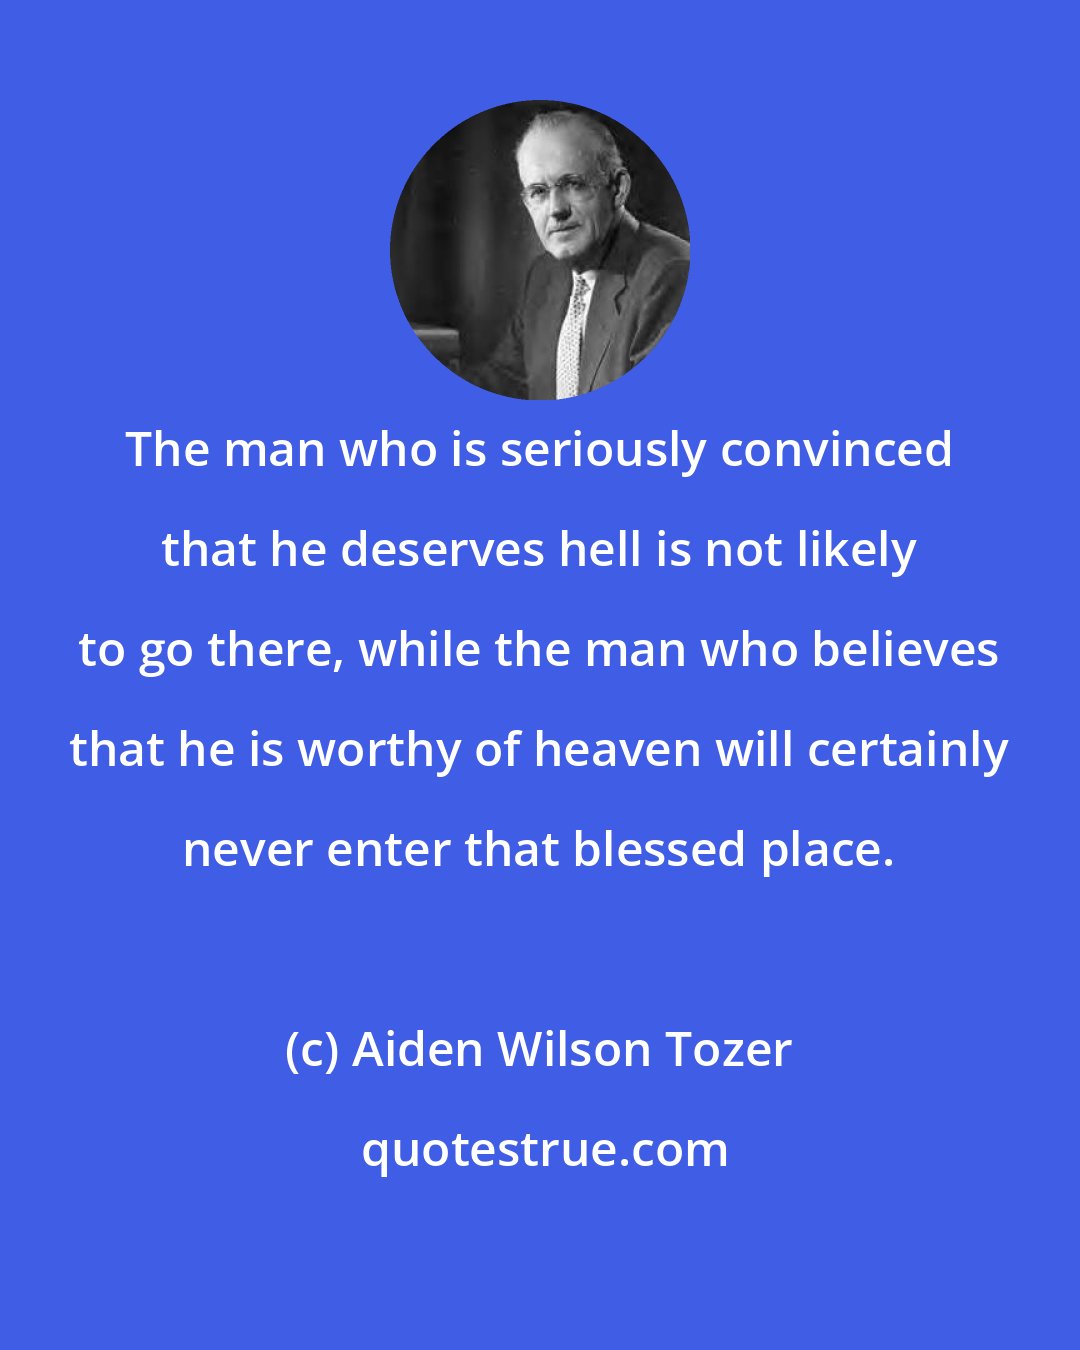 Aiden Wilson Tozer: The man who is seriously convinced that he deserves hell is not likely to go there, while the man who believes that he is worthy of heaven will certainly never enter that blessed place.